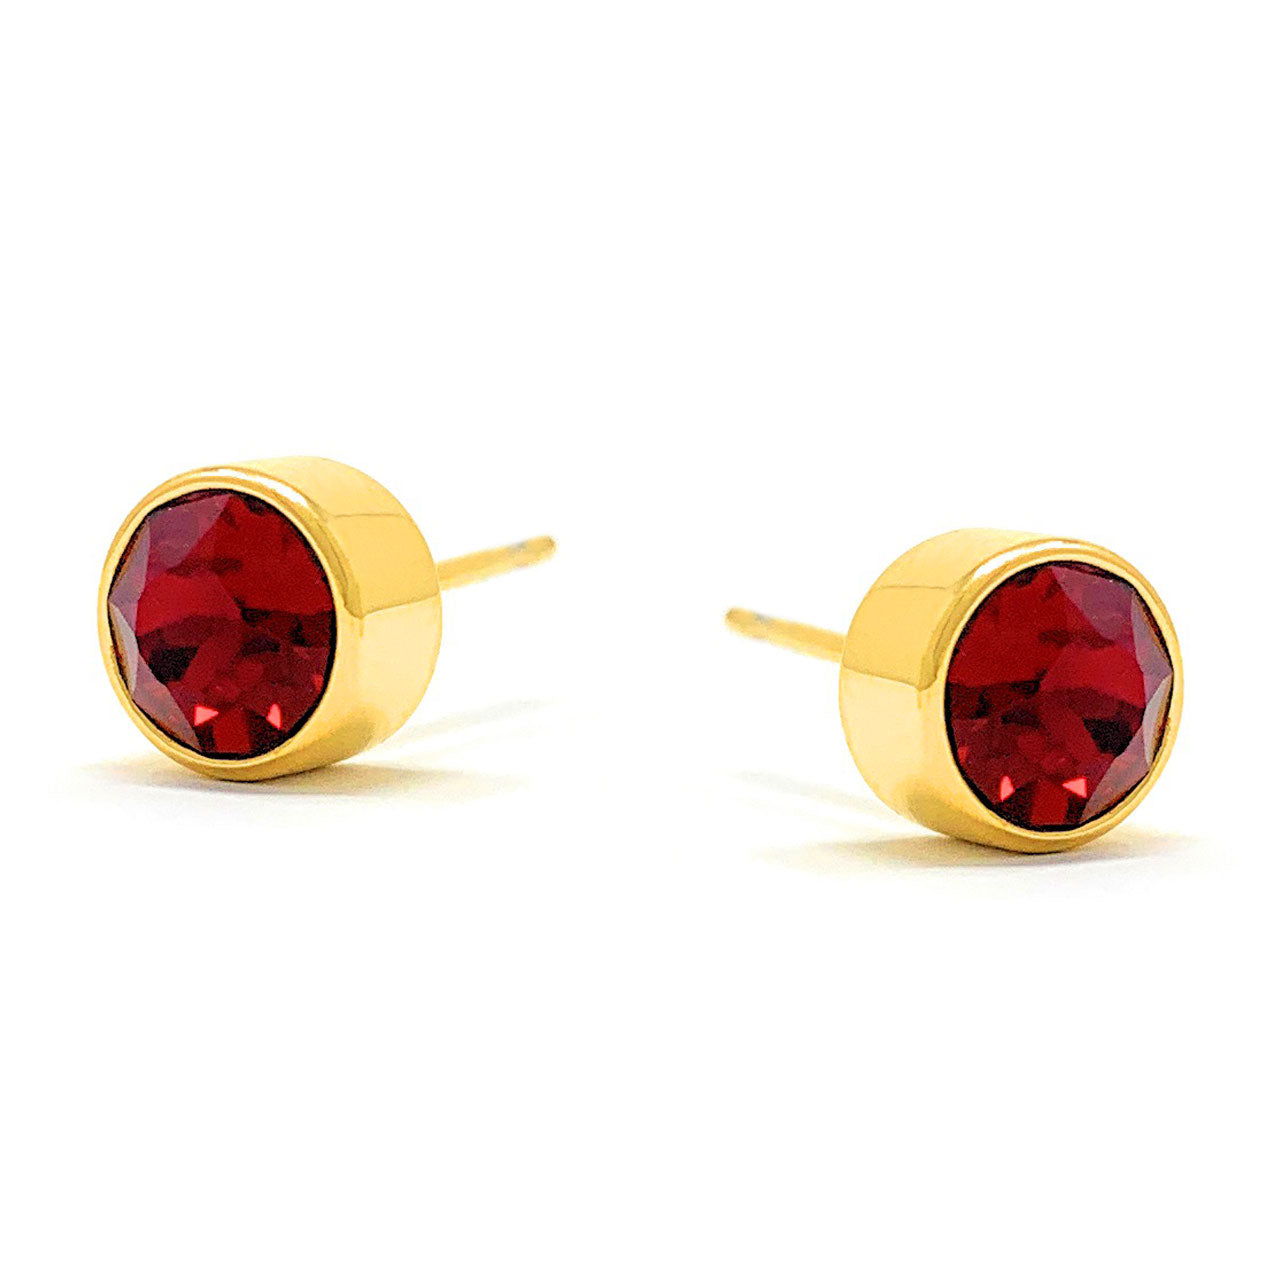 Harley Small Stud Earrings with Red Siam Round Crystals from Swarovski Gold Plated - Ed Heart